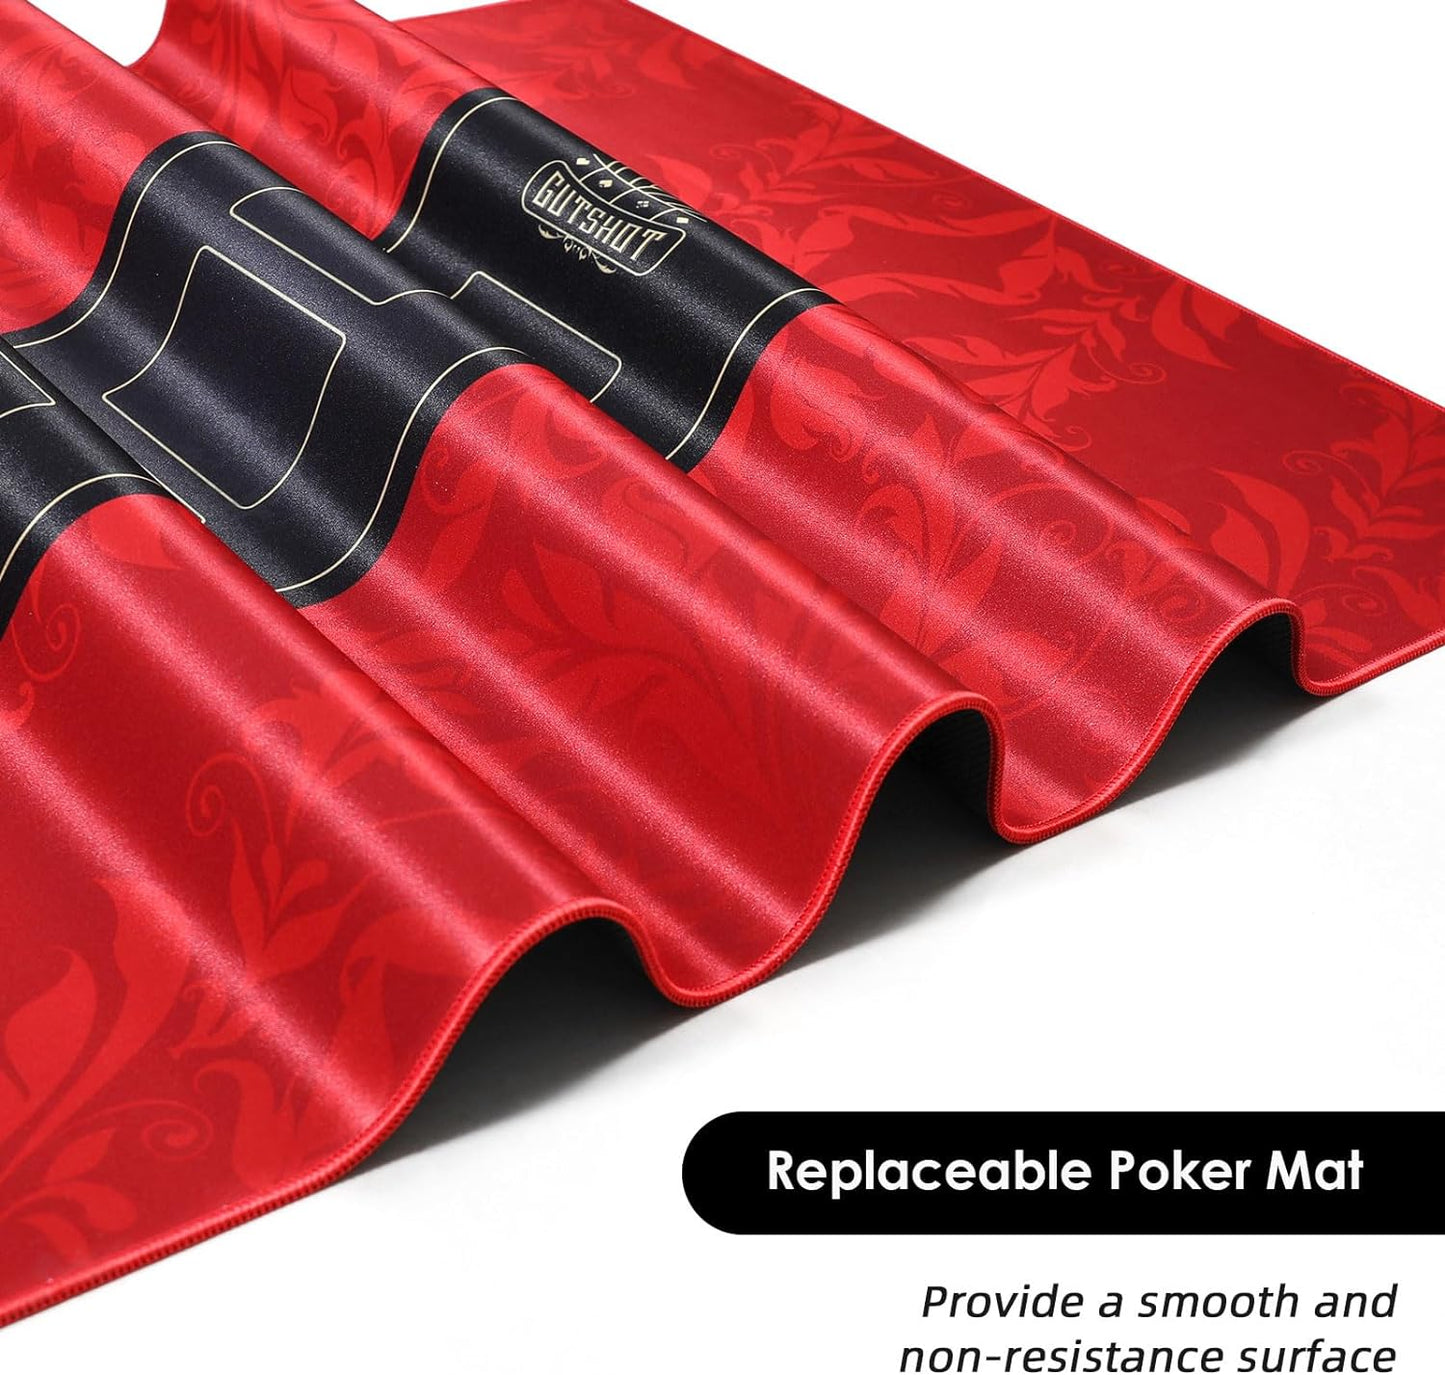 Premium Poker Table for 10 Players - Foldable and Long-Lasting Poker Table, Luxurious Vegas Style Casino Experience at Home (Red)